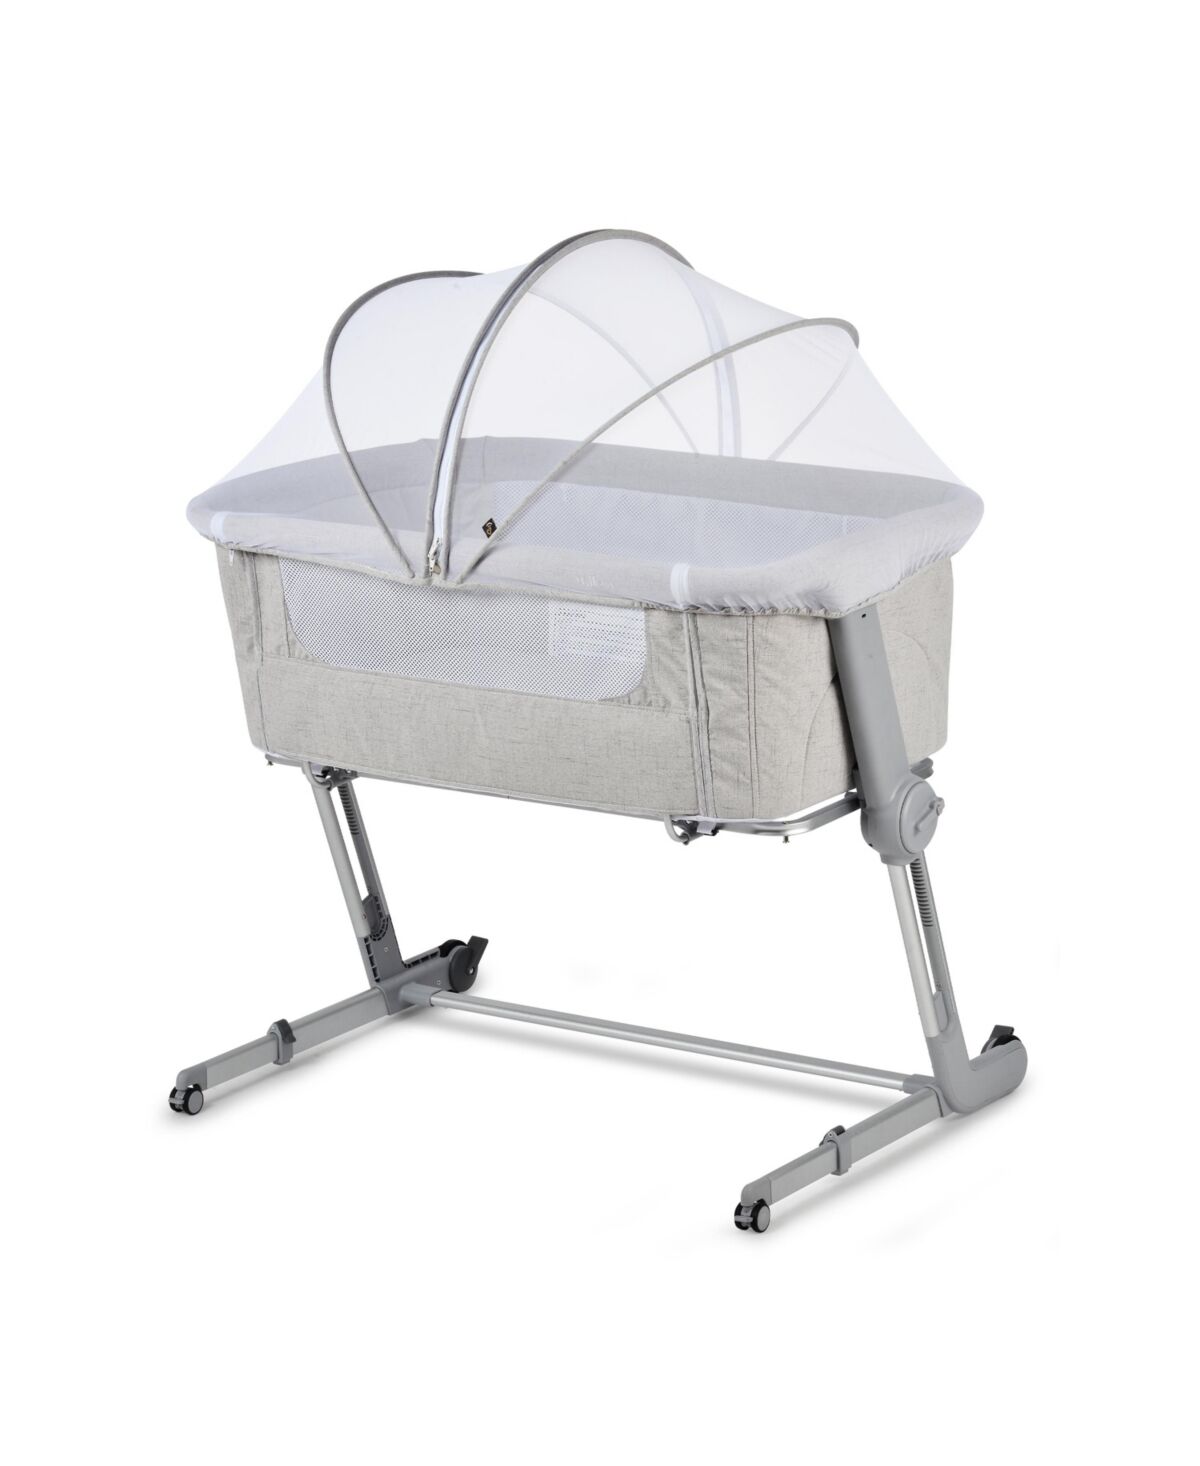 Unilove Hug Me Plus 3-in-1 Bedside Sleeper & Portable Bassinet with Mosquito Net - Shadow Gray